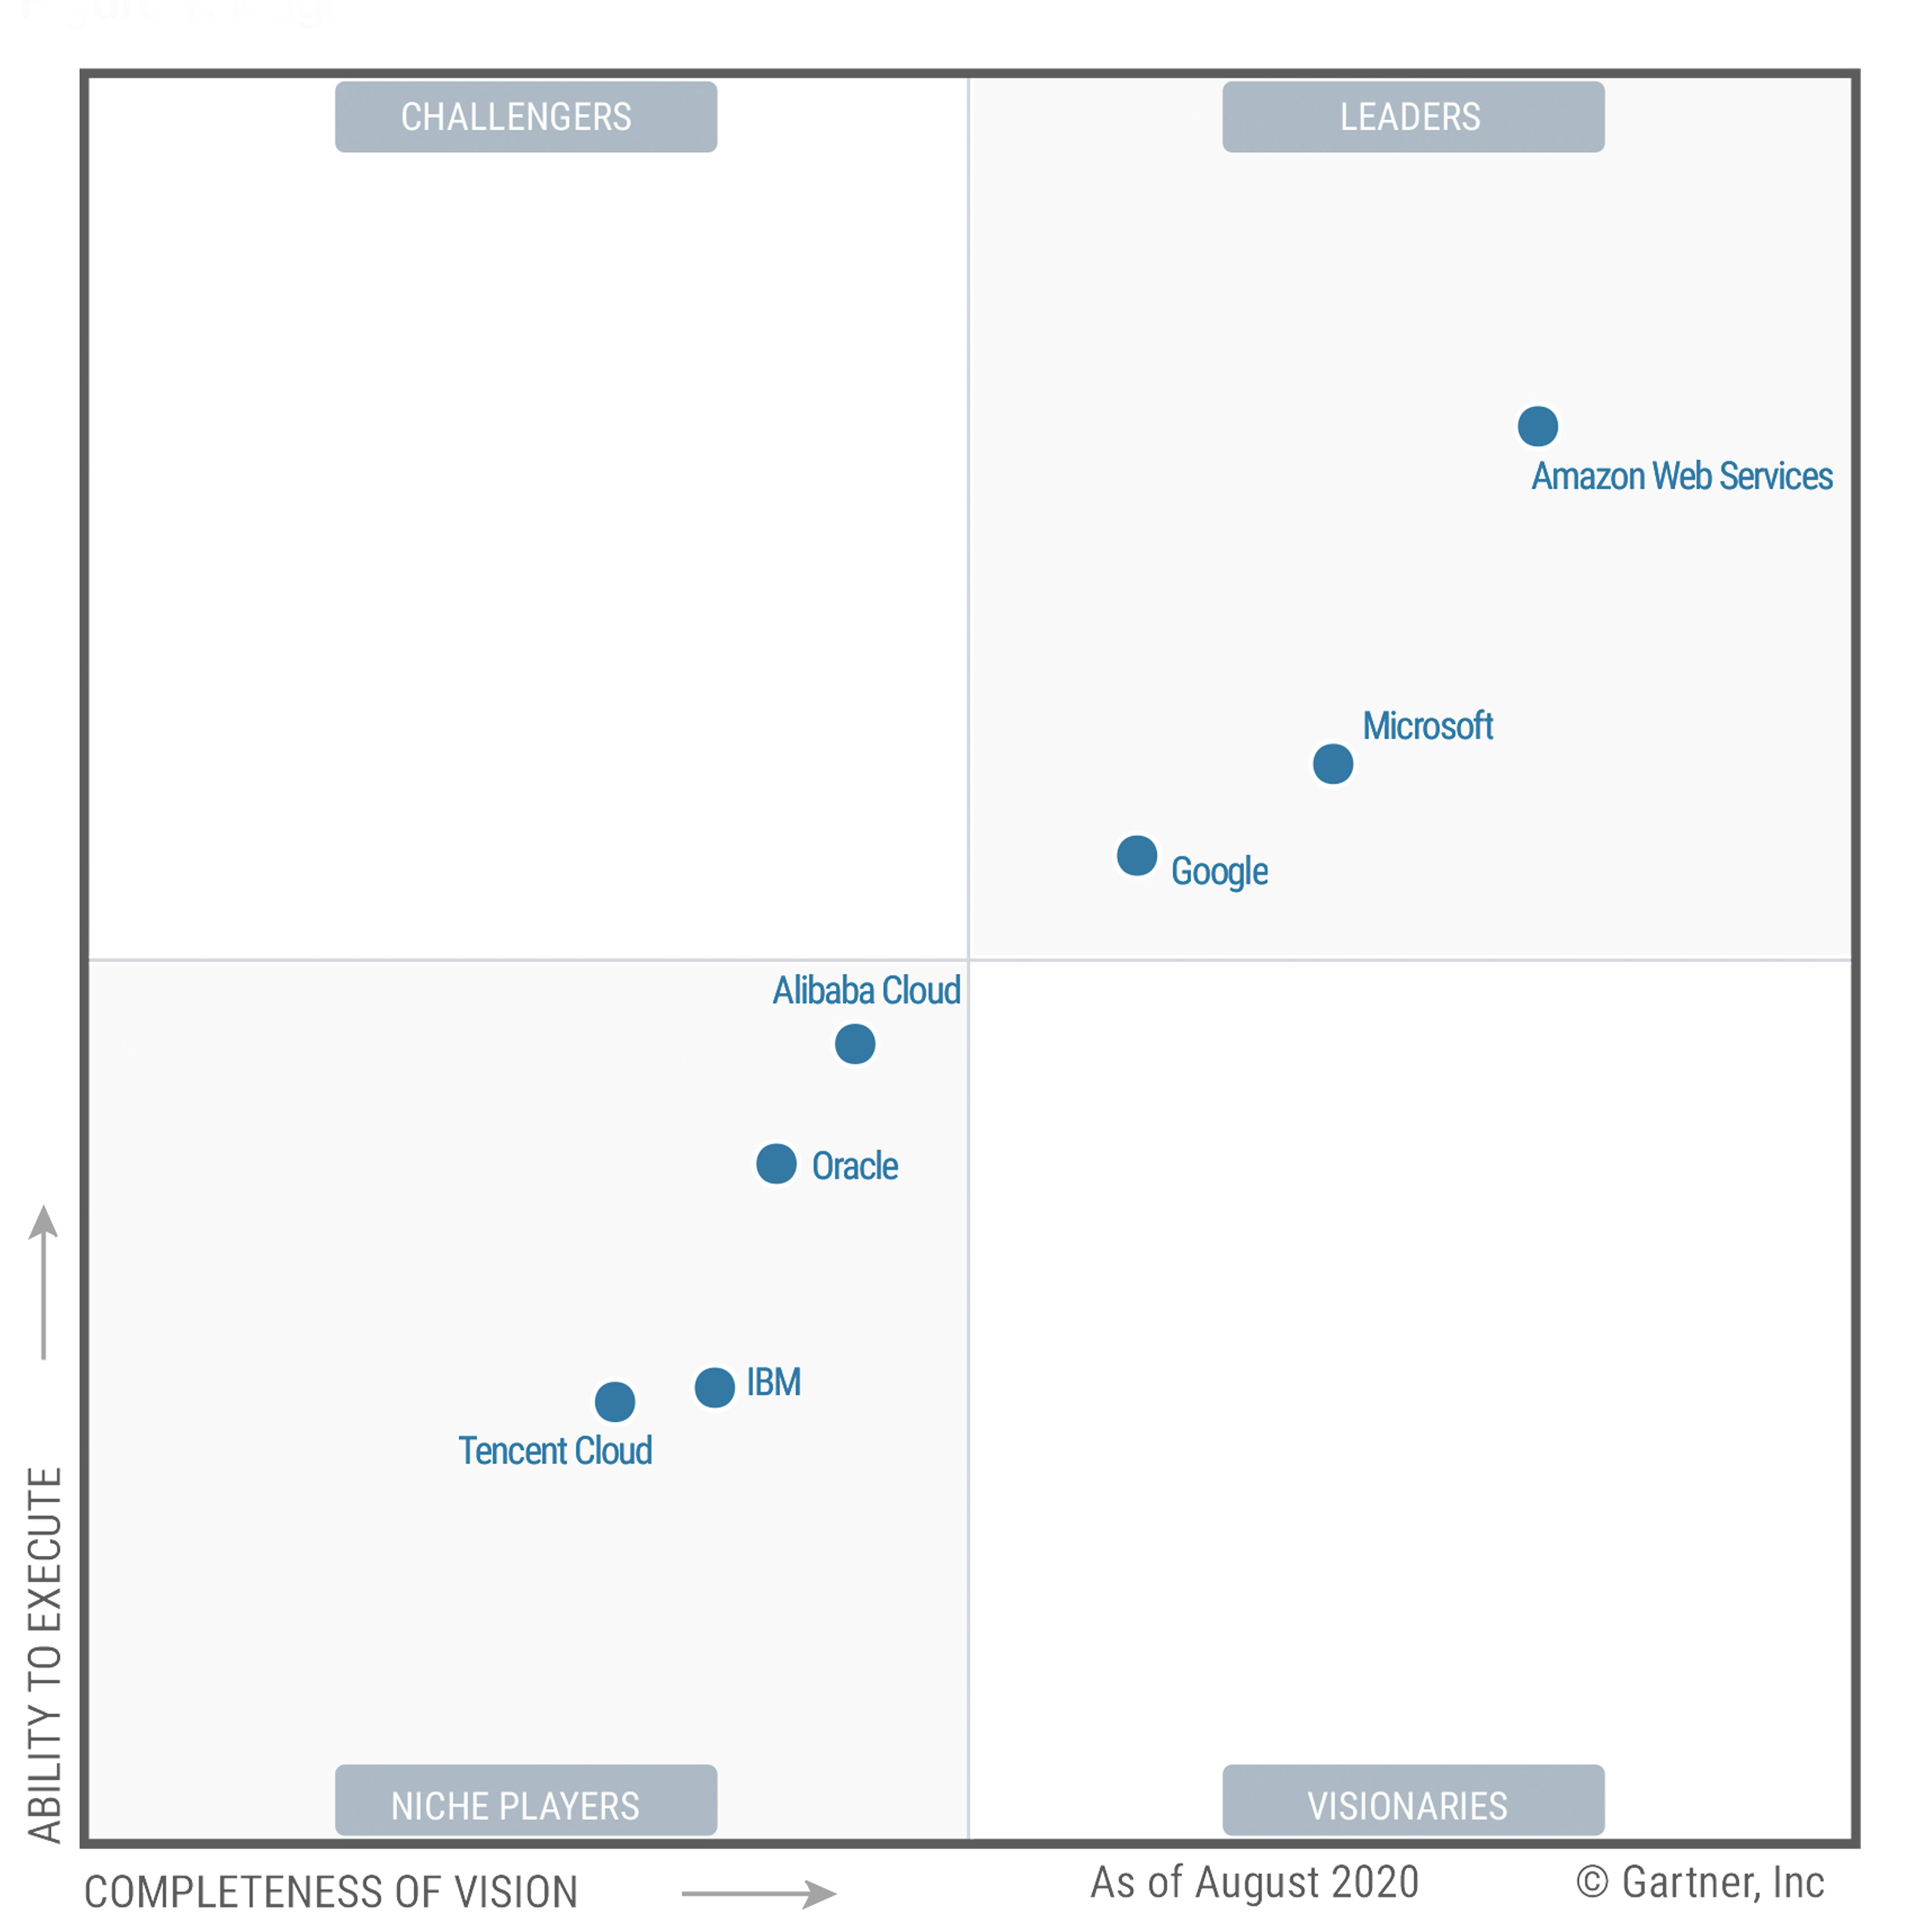 Magic Quadrant for Cloud Infrastructure and Platform Services, 2020